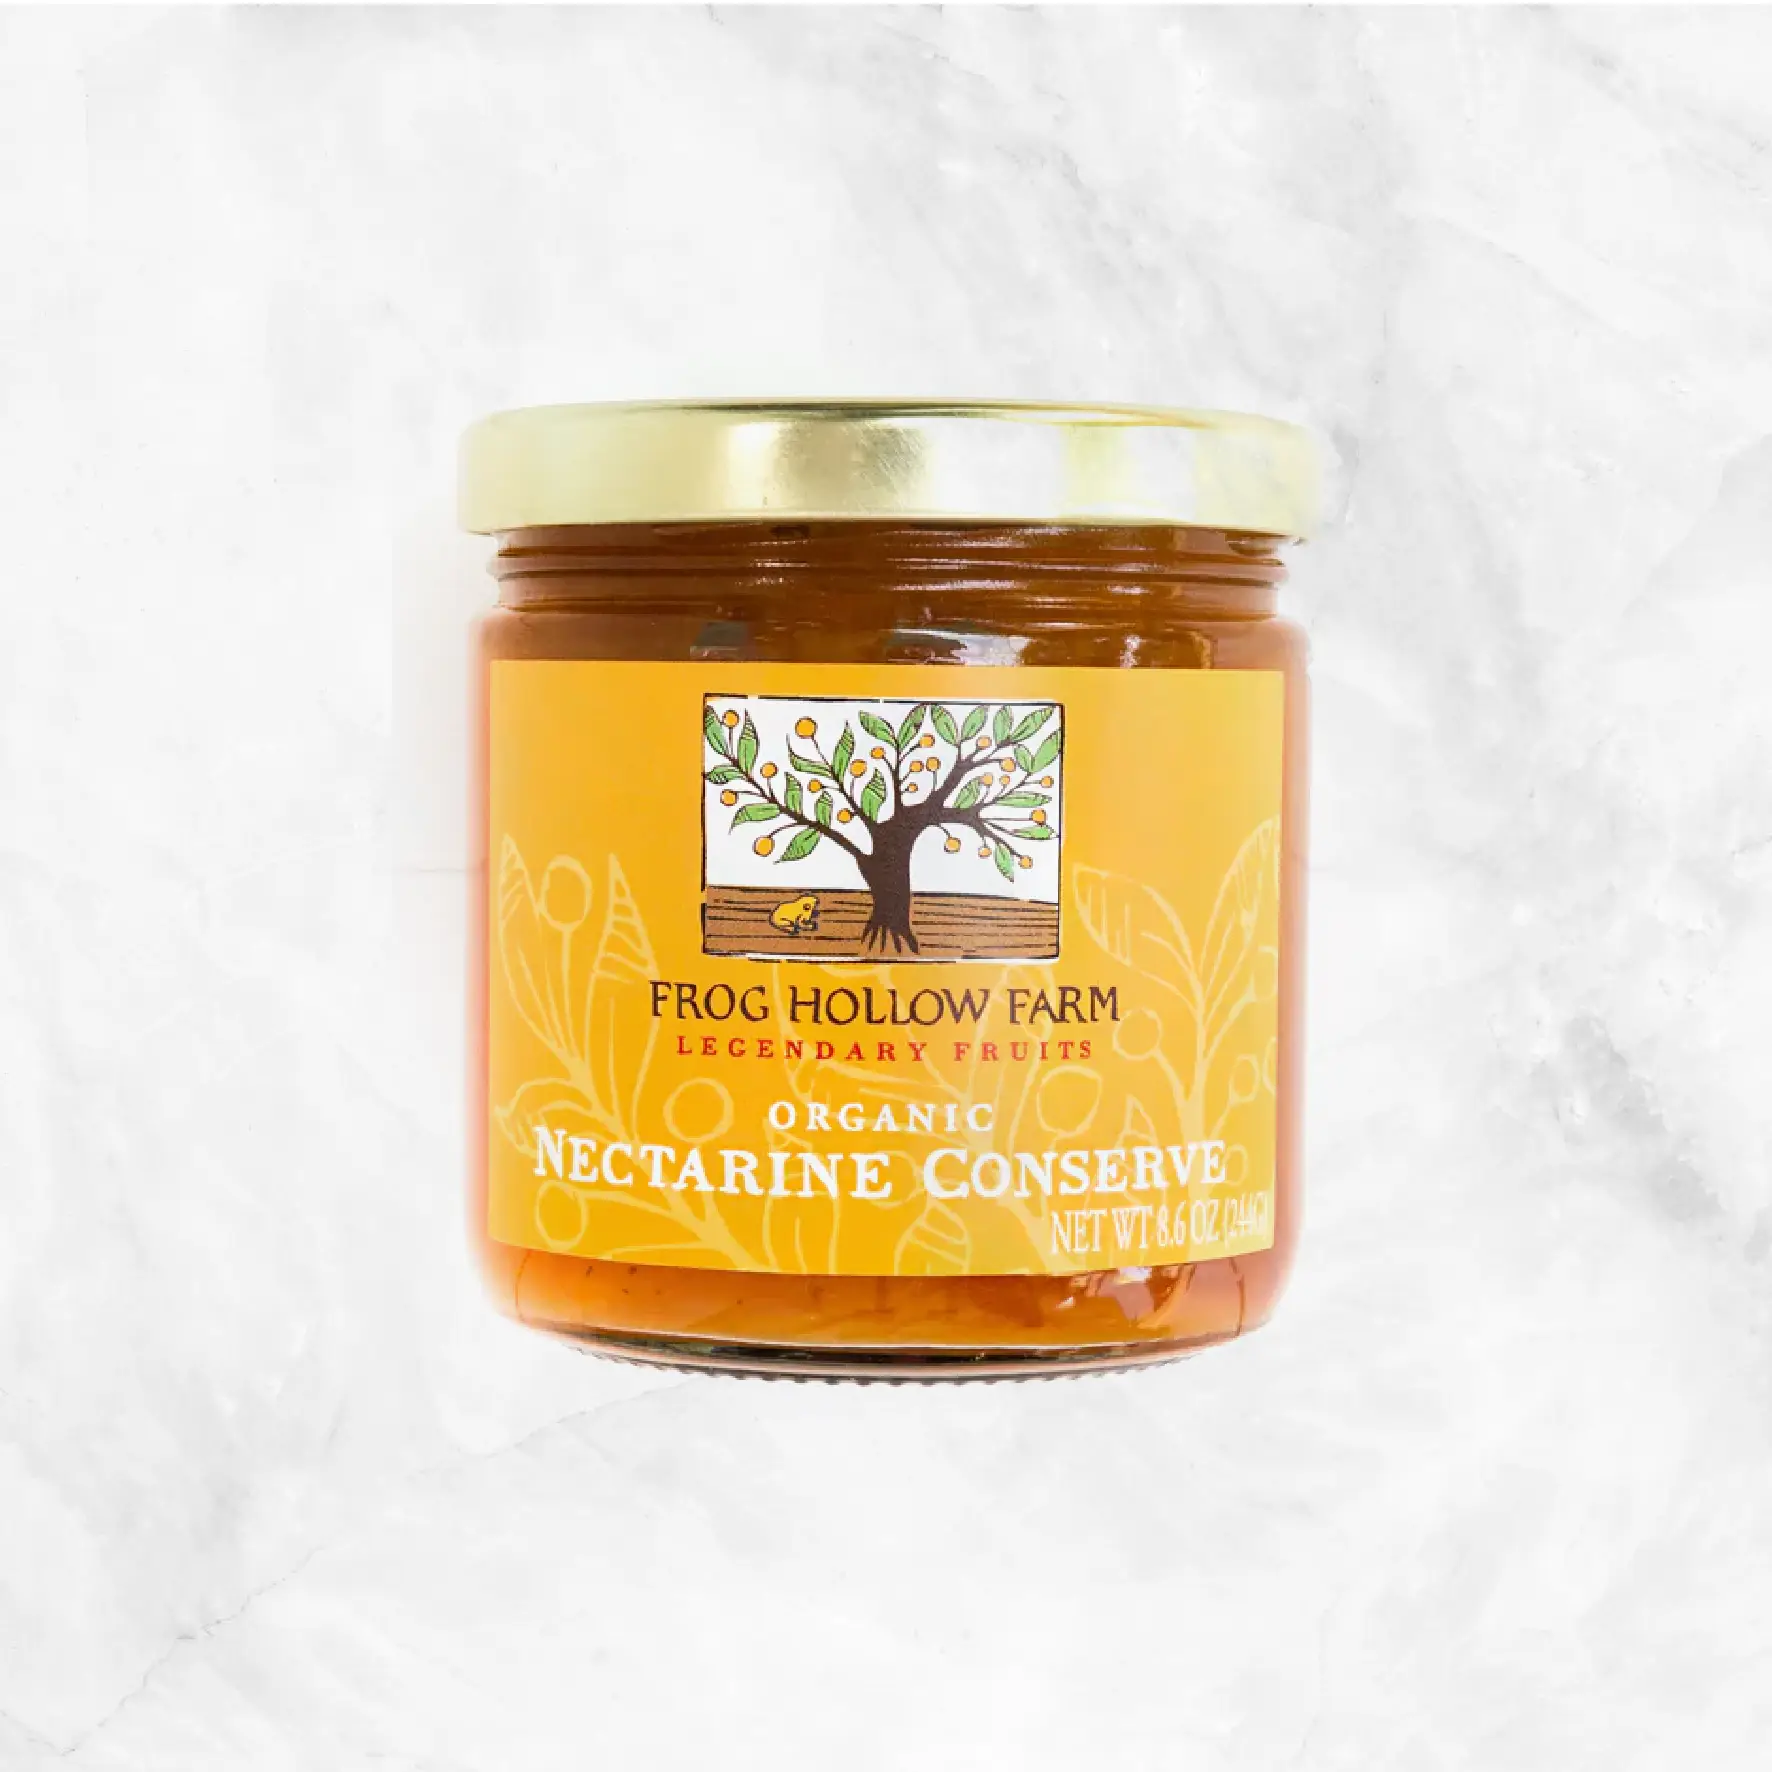 Organic Nectarine Conserve Delivery